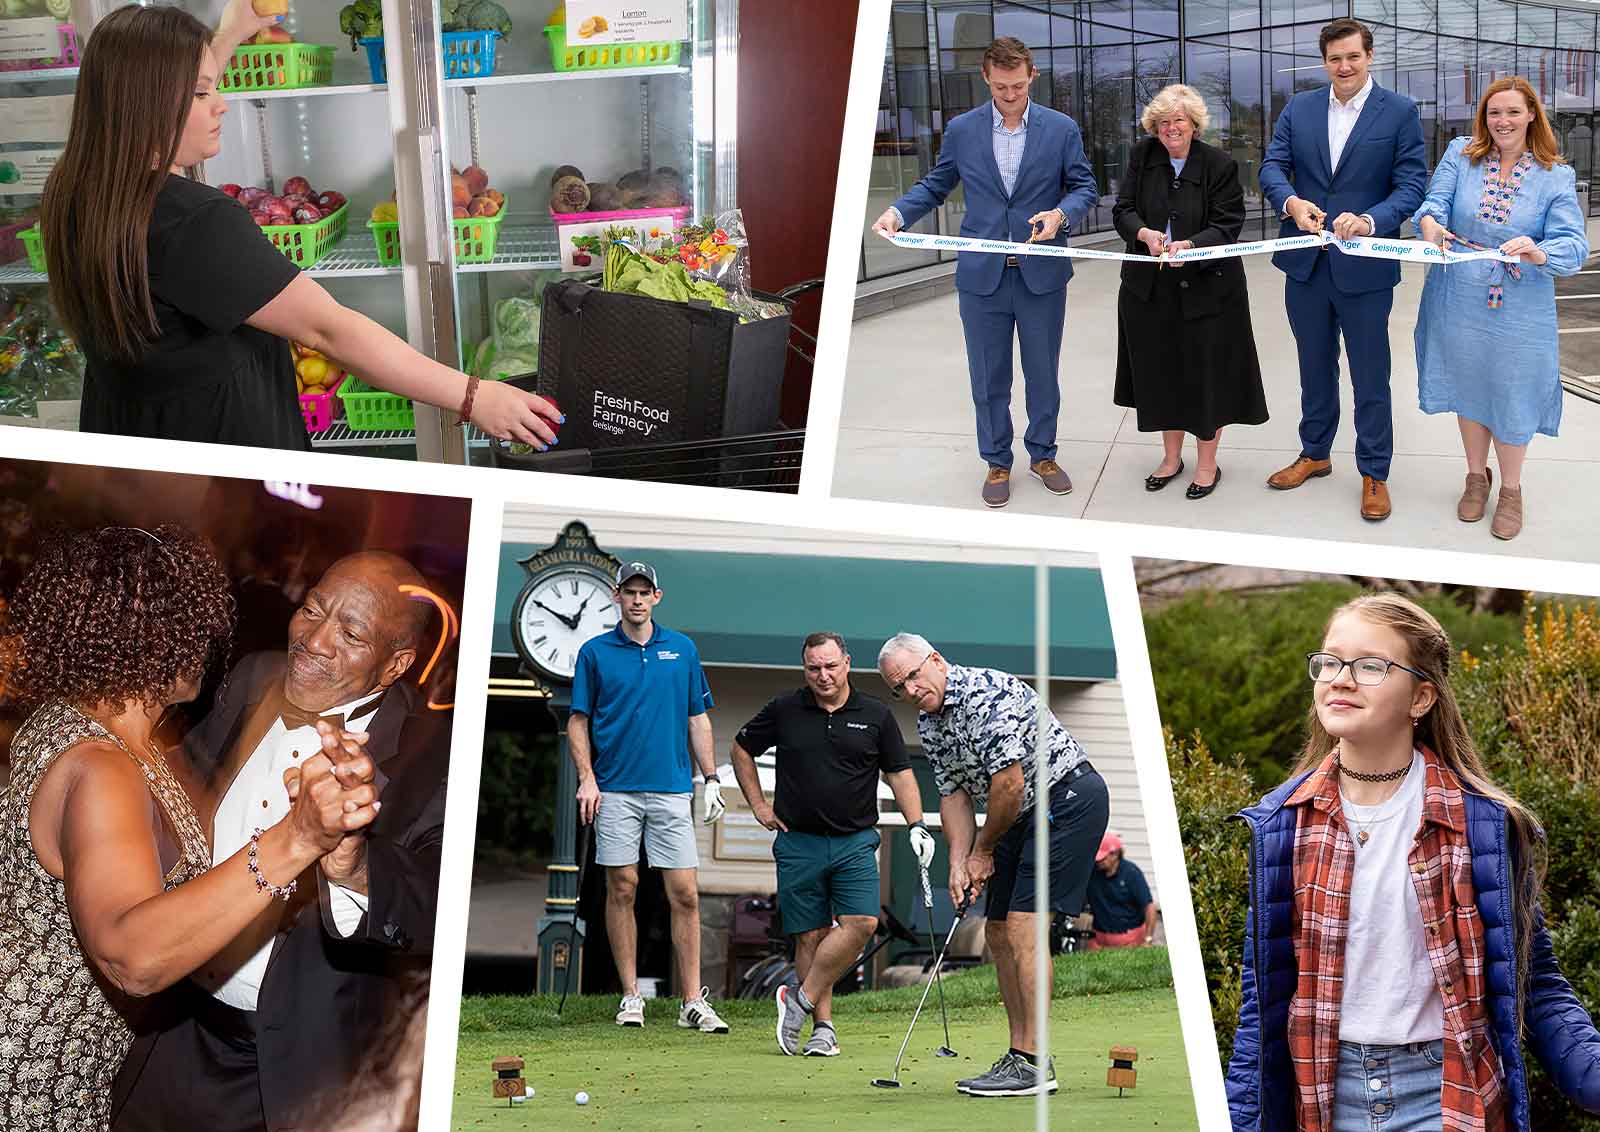 A photo-collage of philanthropic events sponsored by Geisinger.